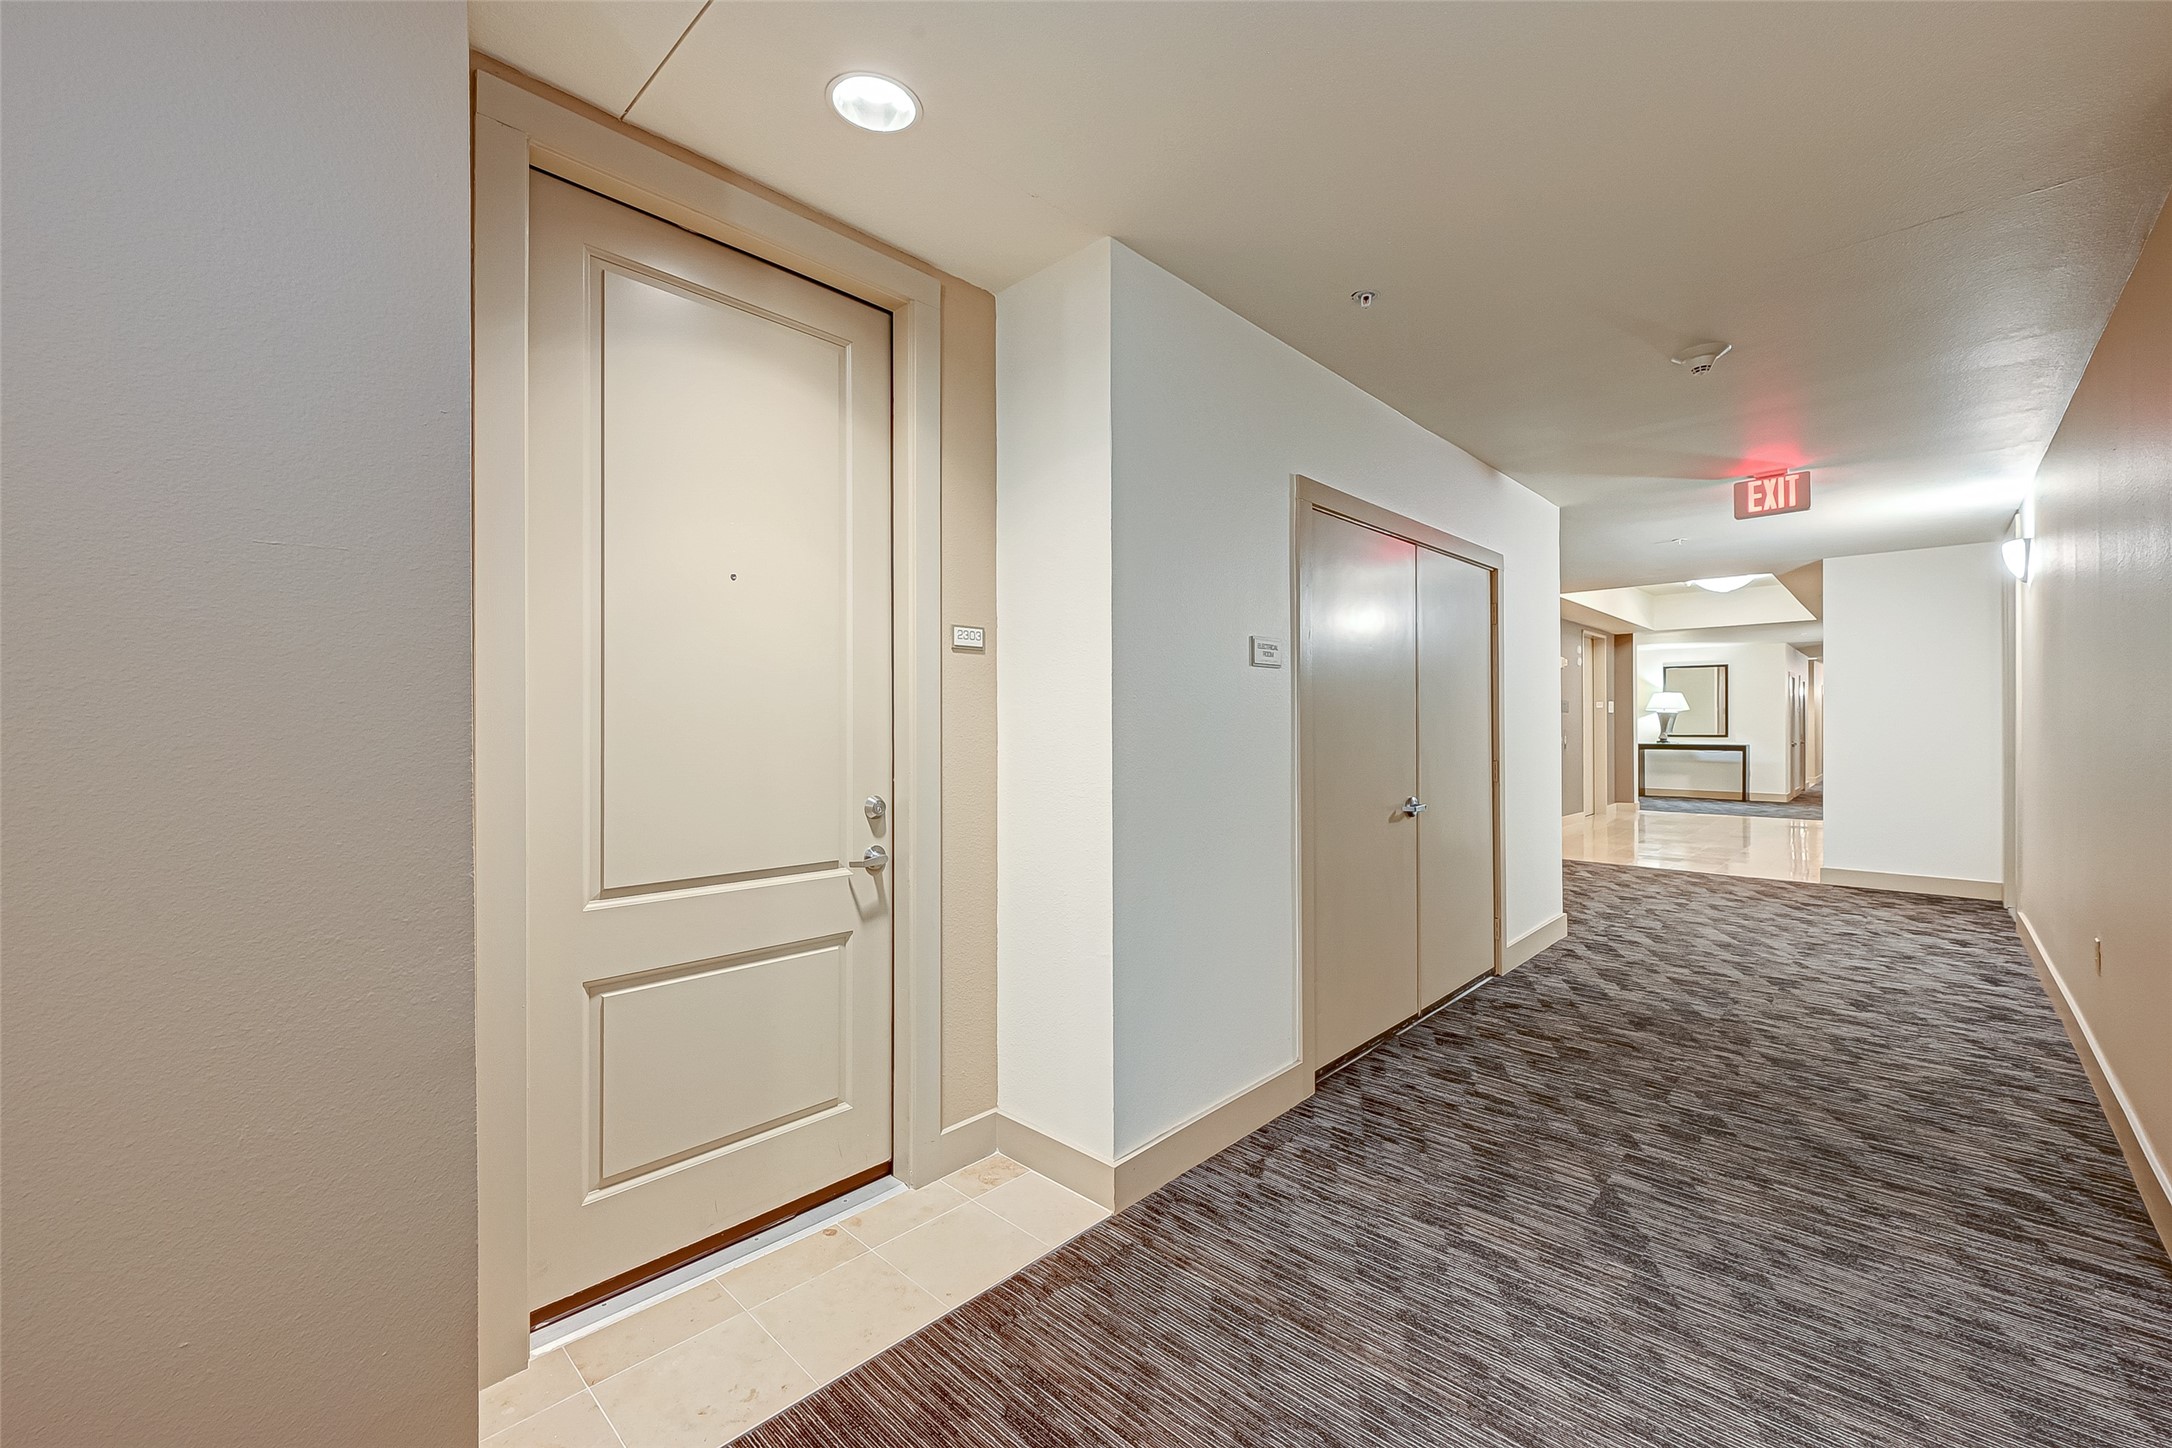 Condo #2303 is on the 23rd floor and a few steps away from the elevators.